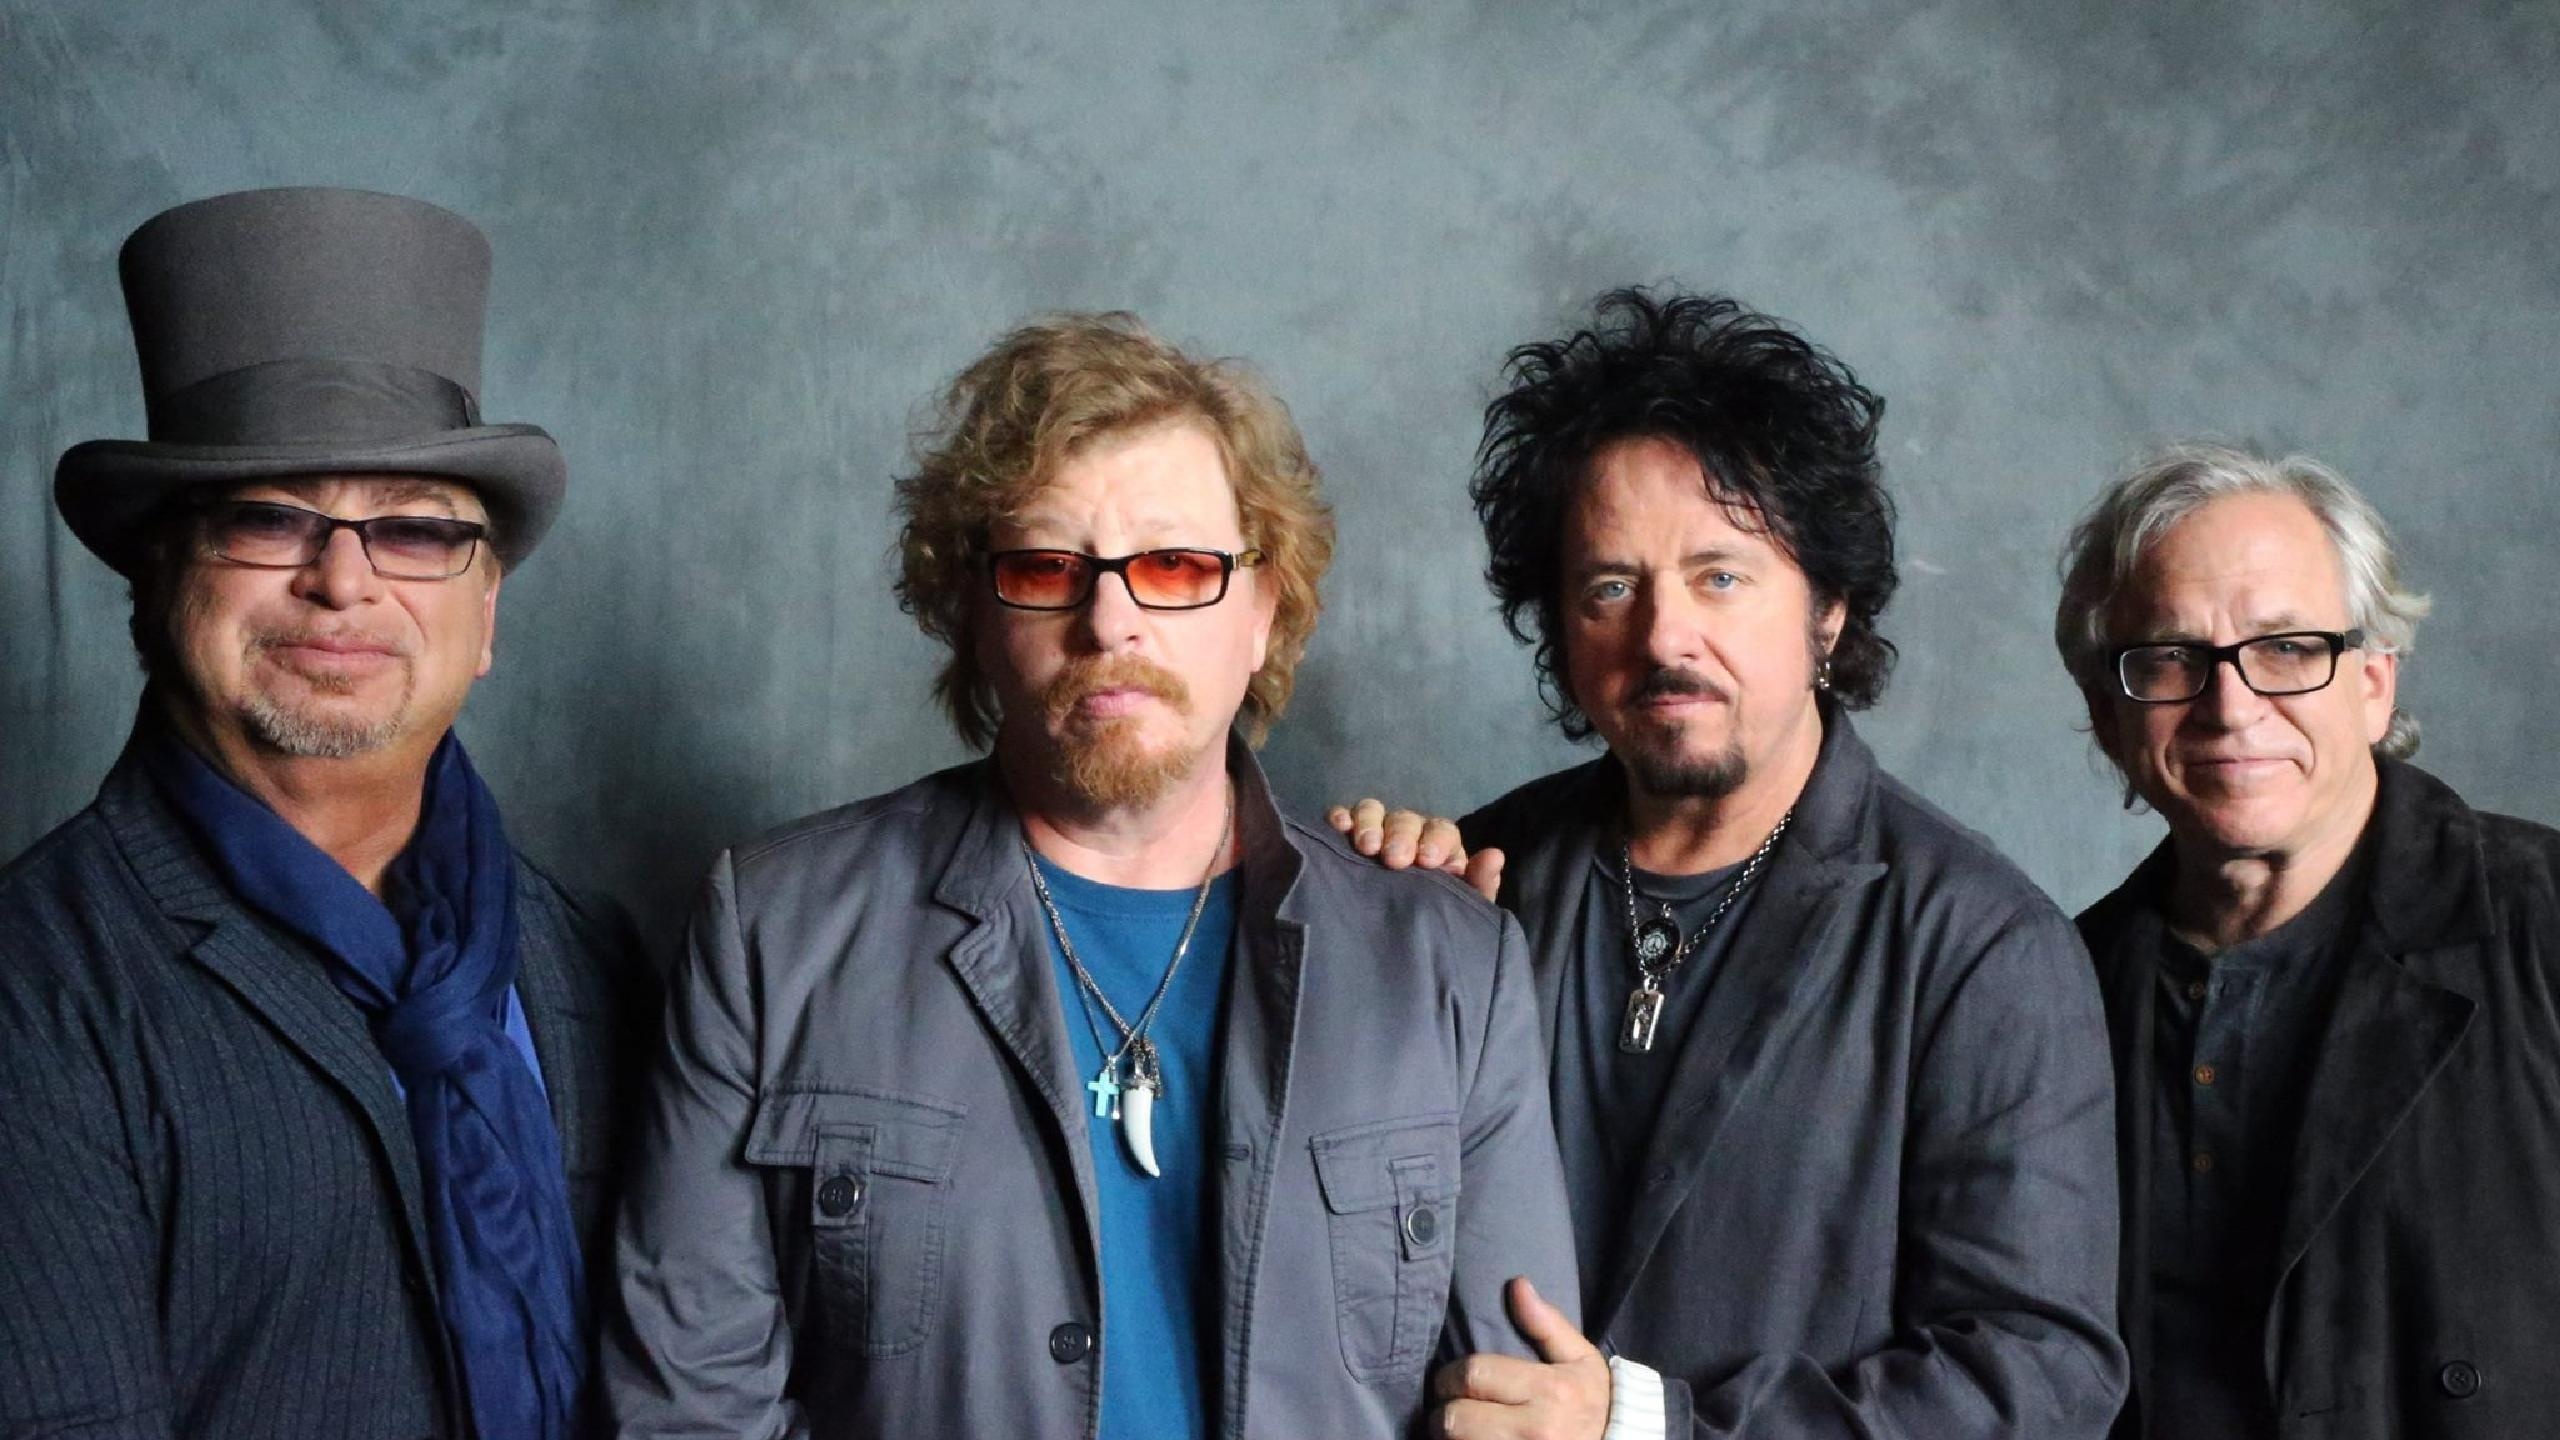 Toto band, Toto concert dates, Toto tickets information, 2560x1440 HD Desktop